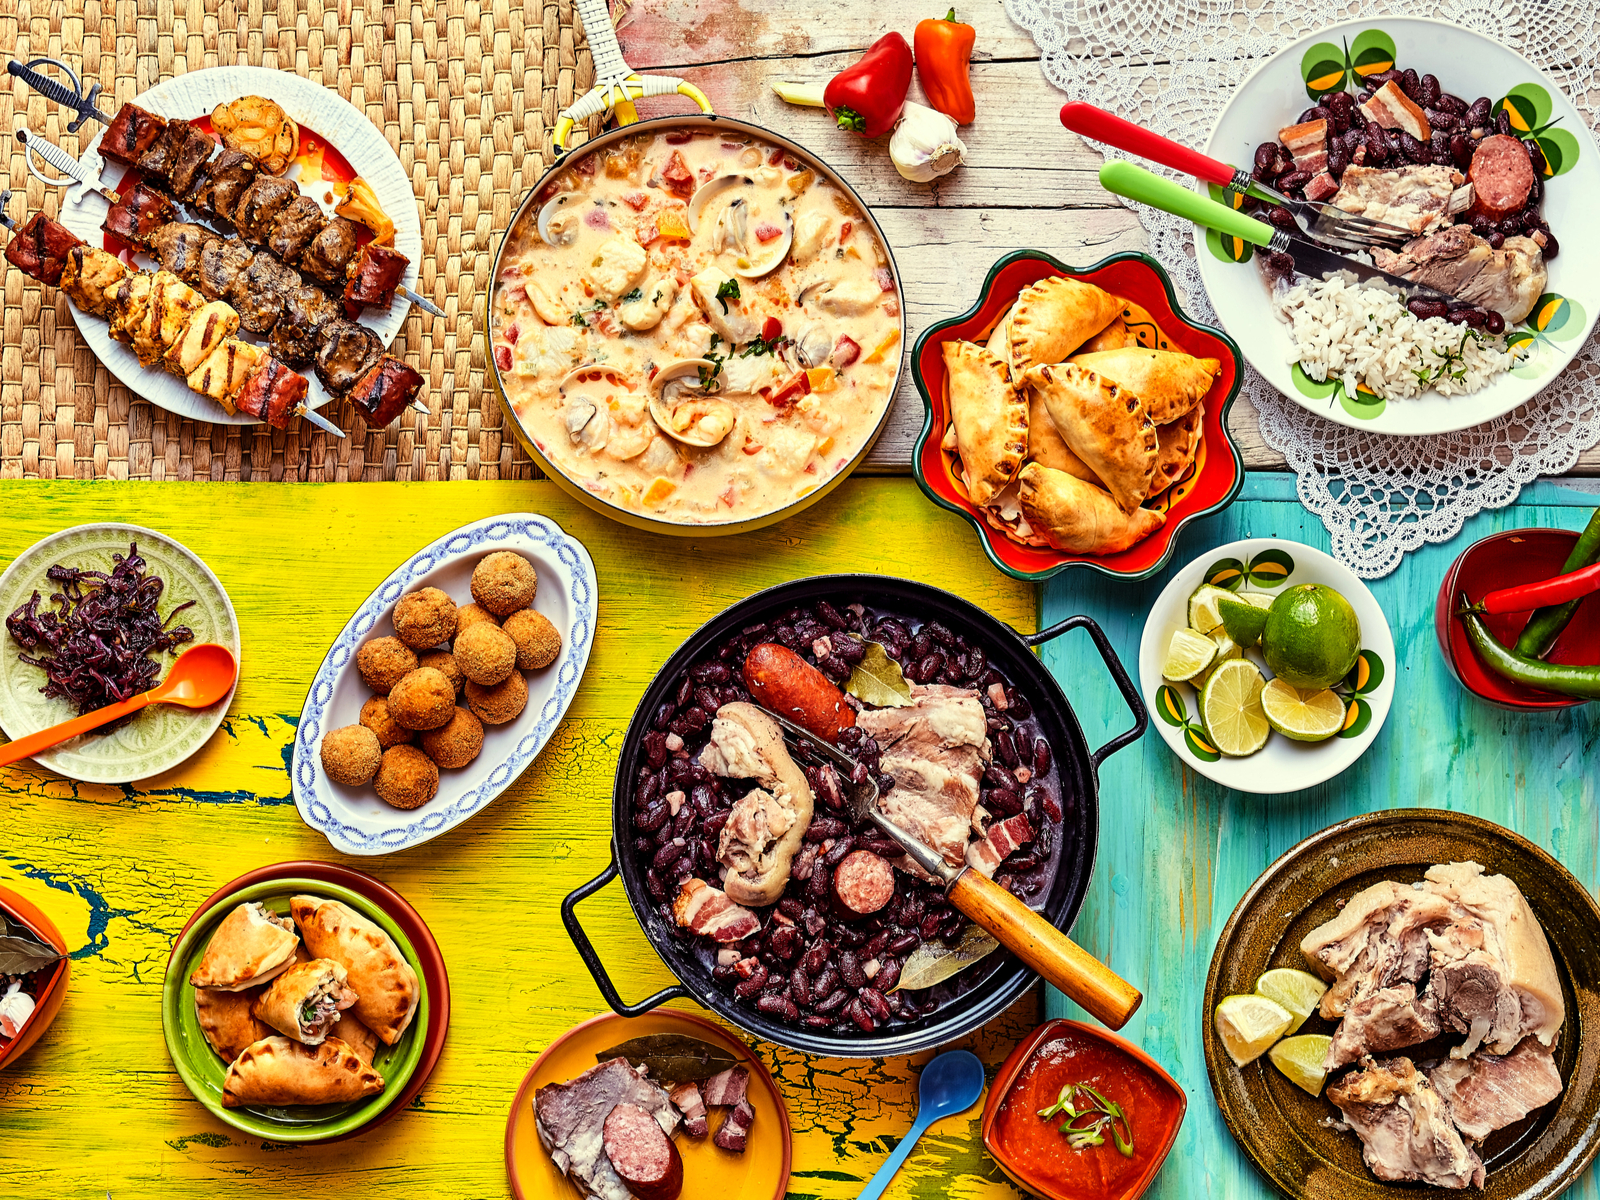 Top down image of some common food choices in Brazil